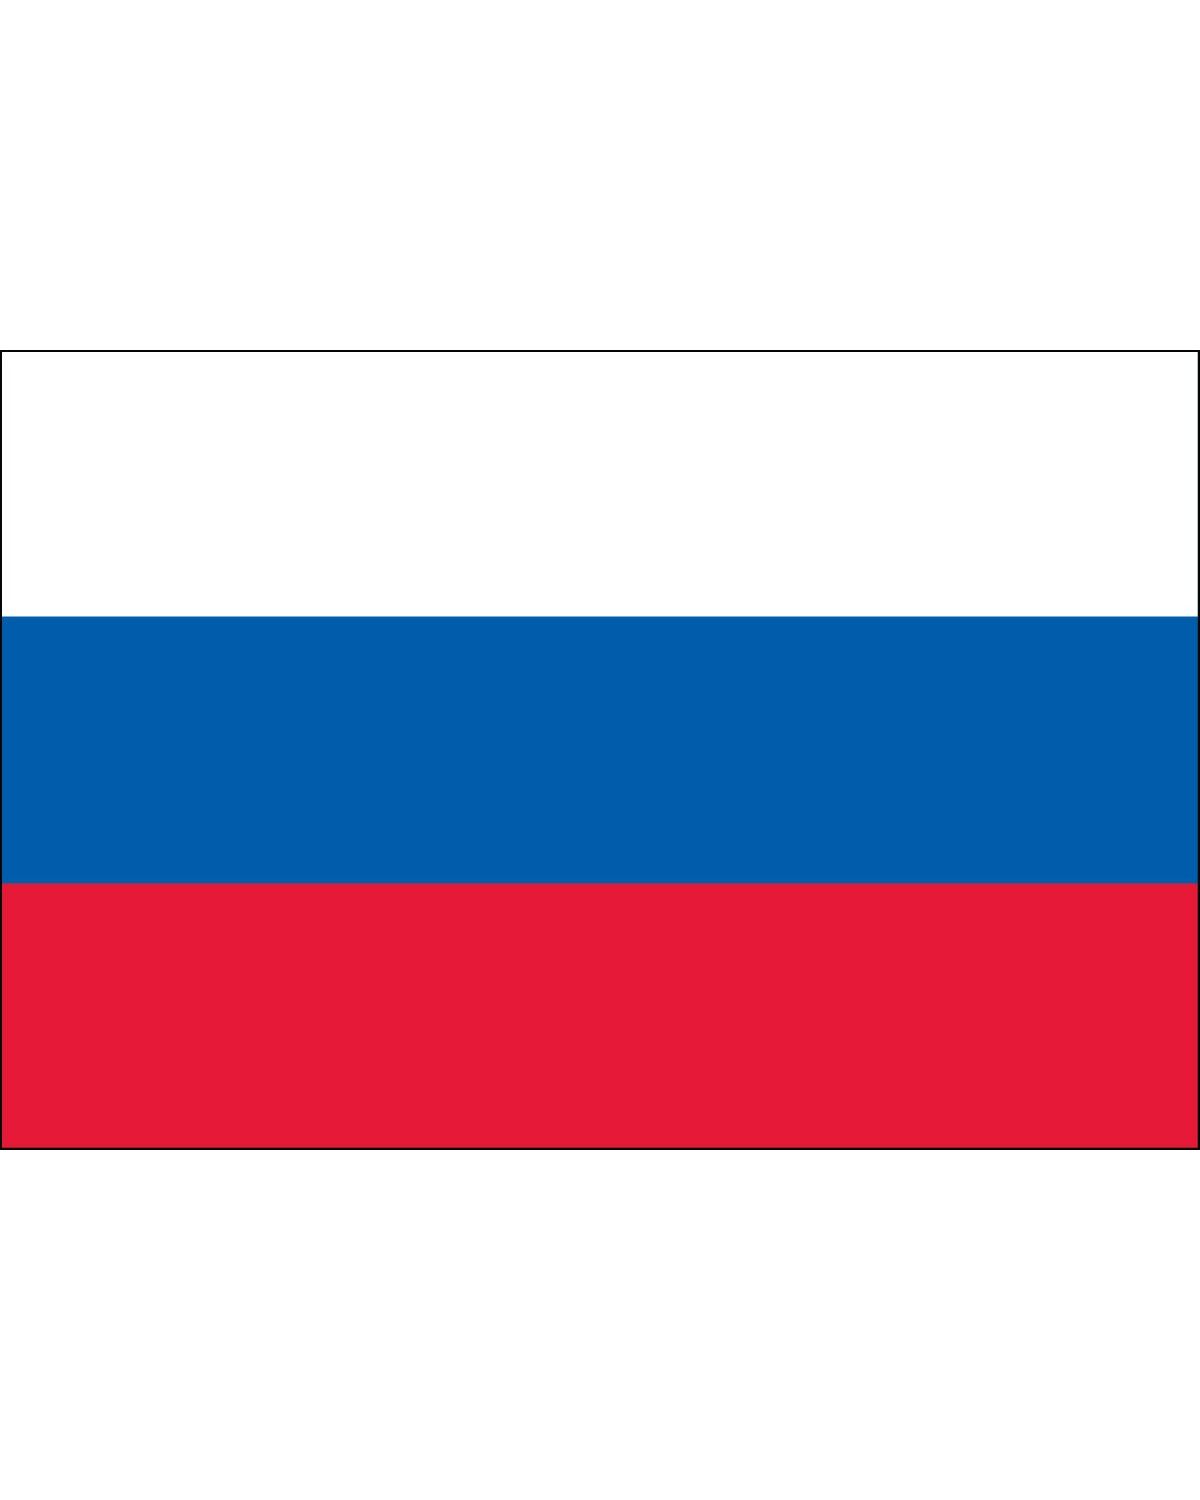 russian-flag-free-photo-download-freeimages